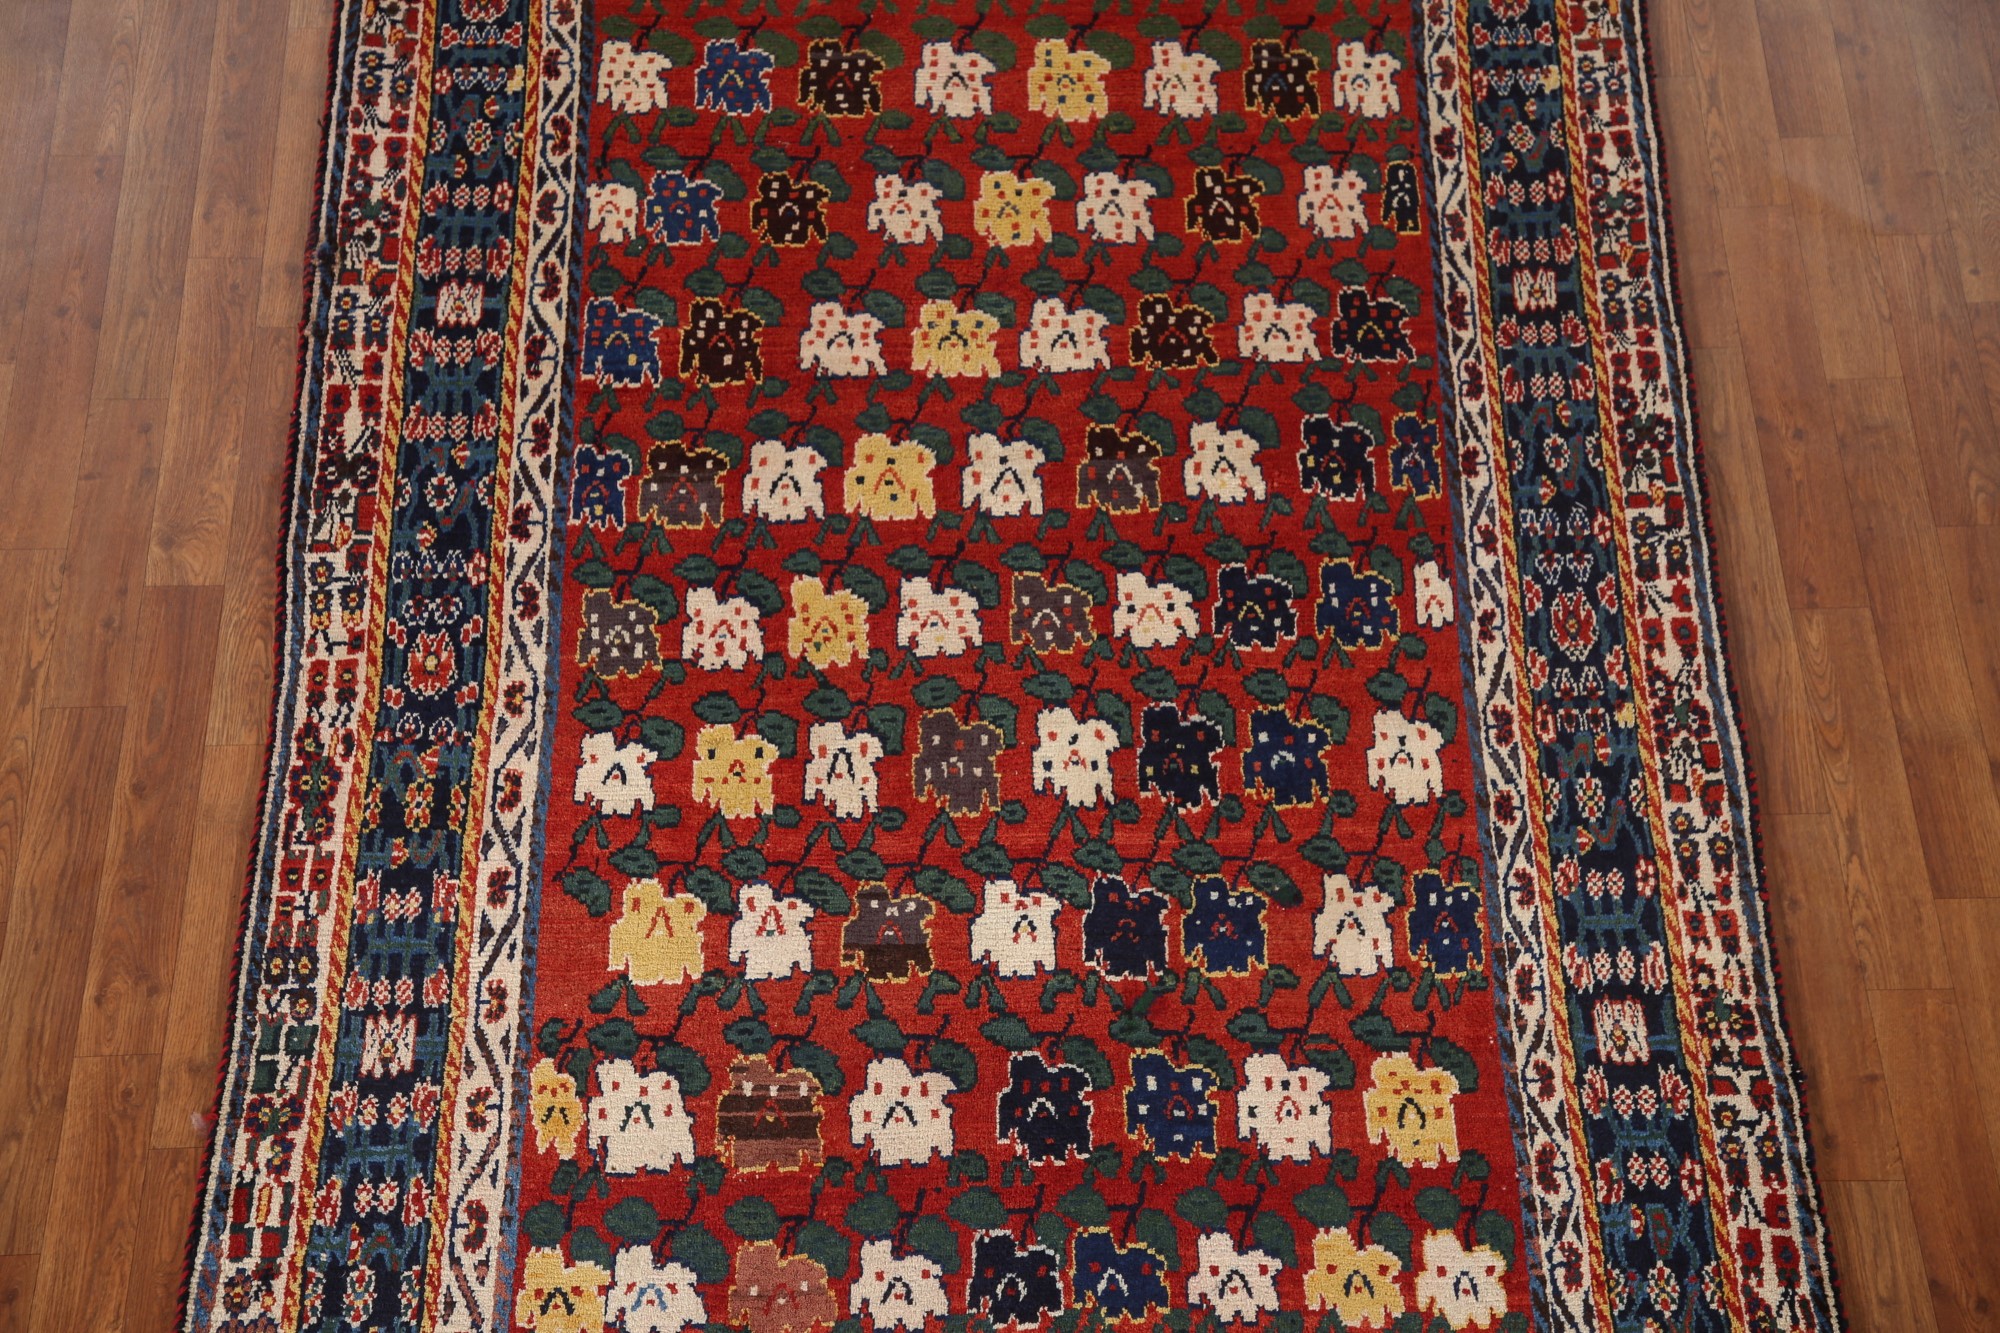 3x4 Red Blue Floral Handmade Area Colorful Afghan Rug, Small